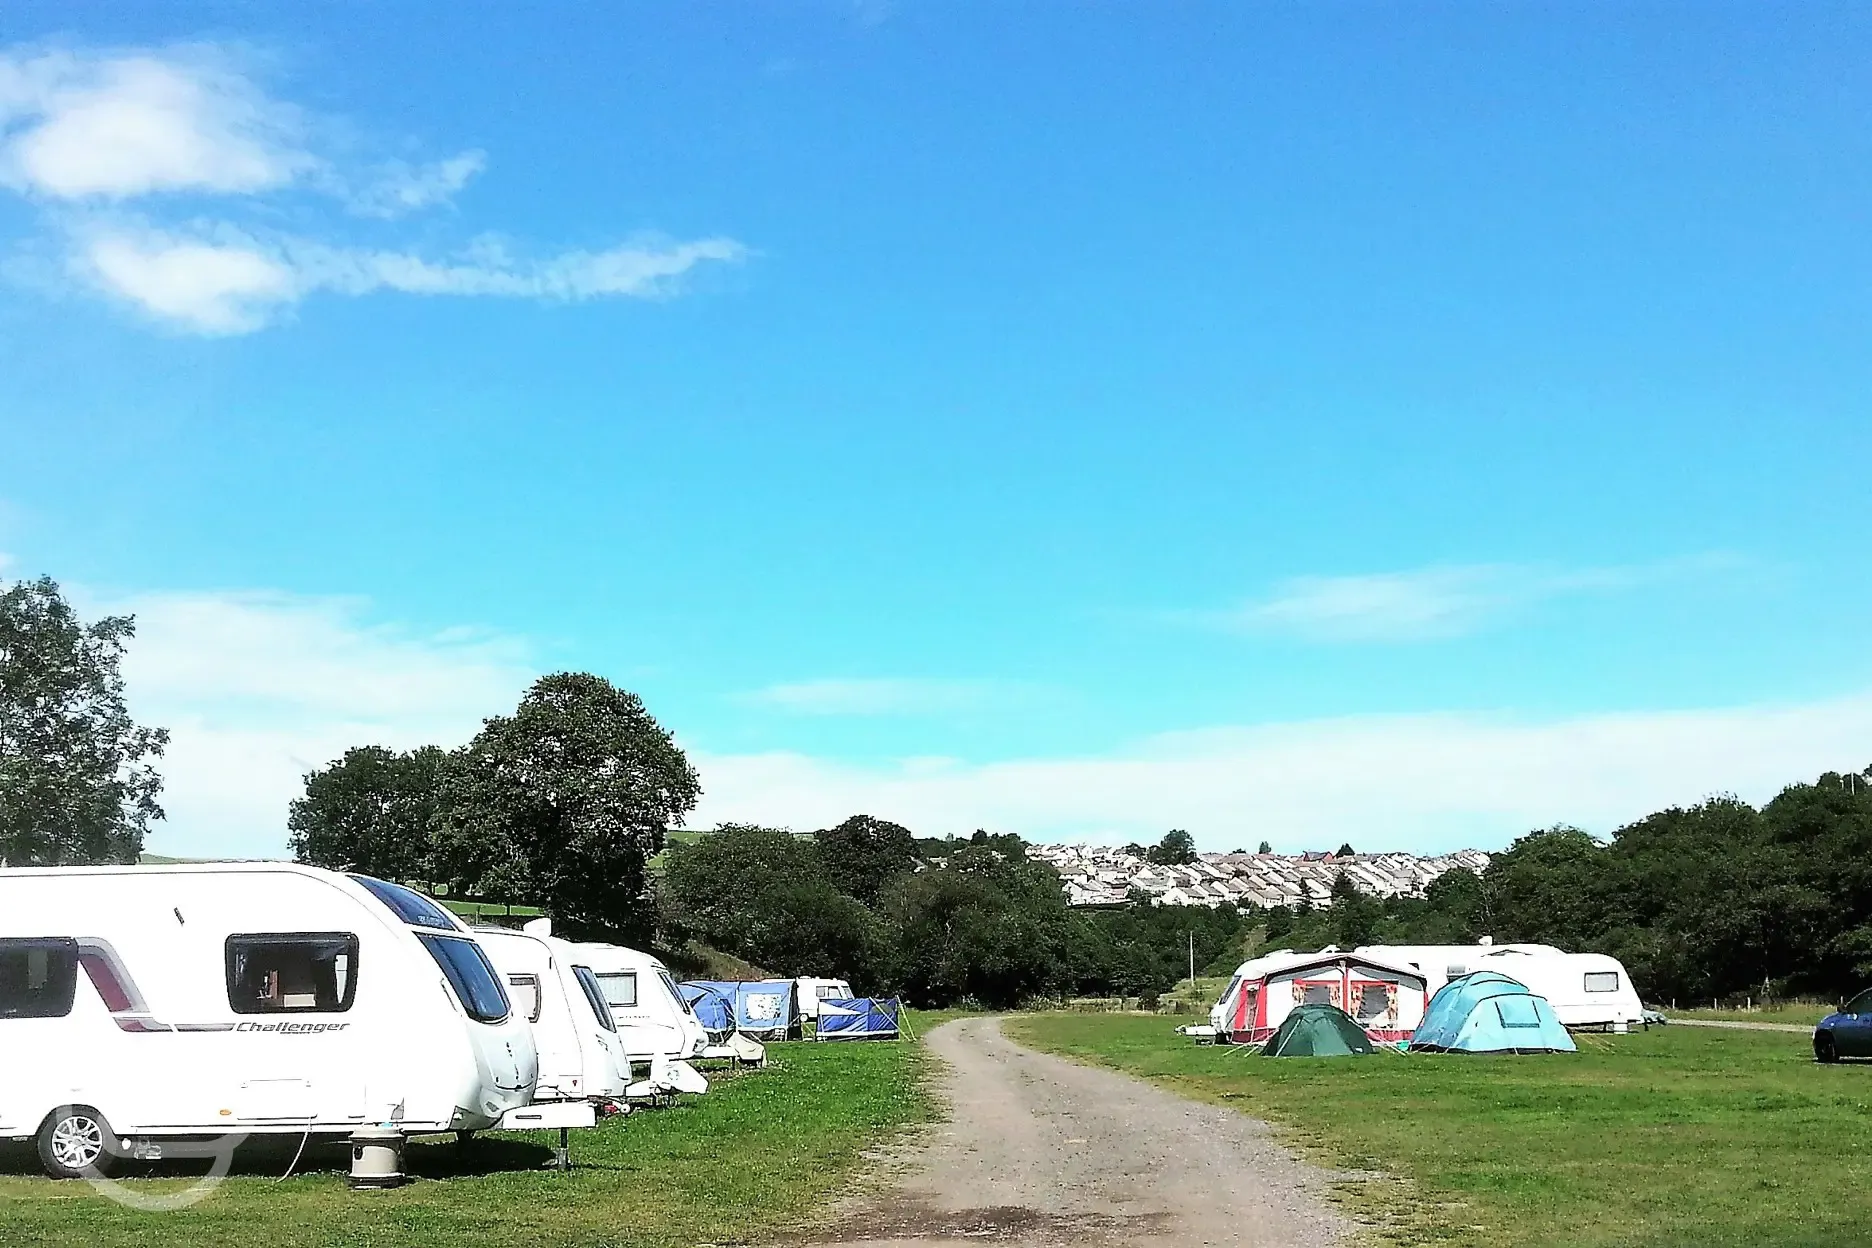 Our Welsh Caravan and camping